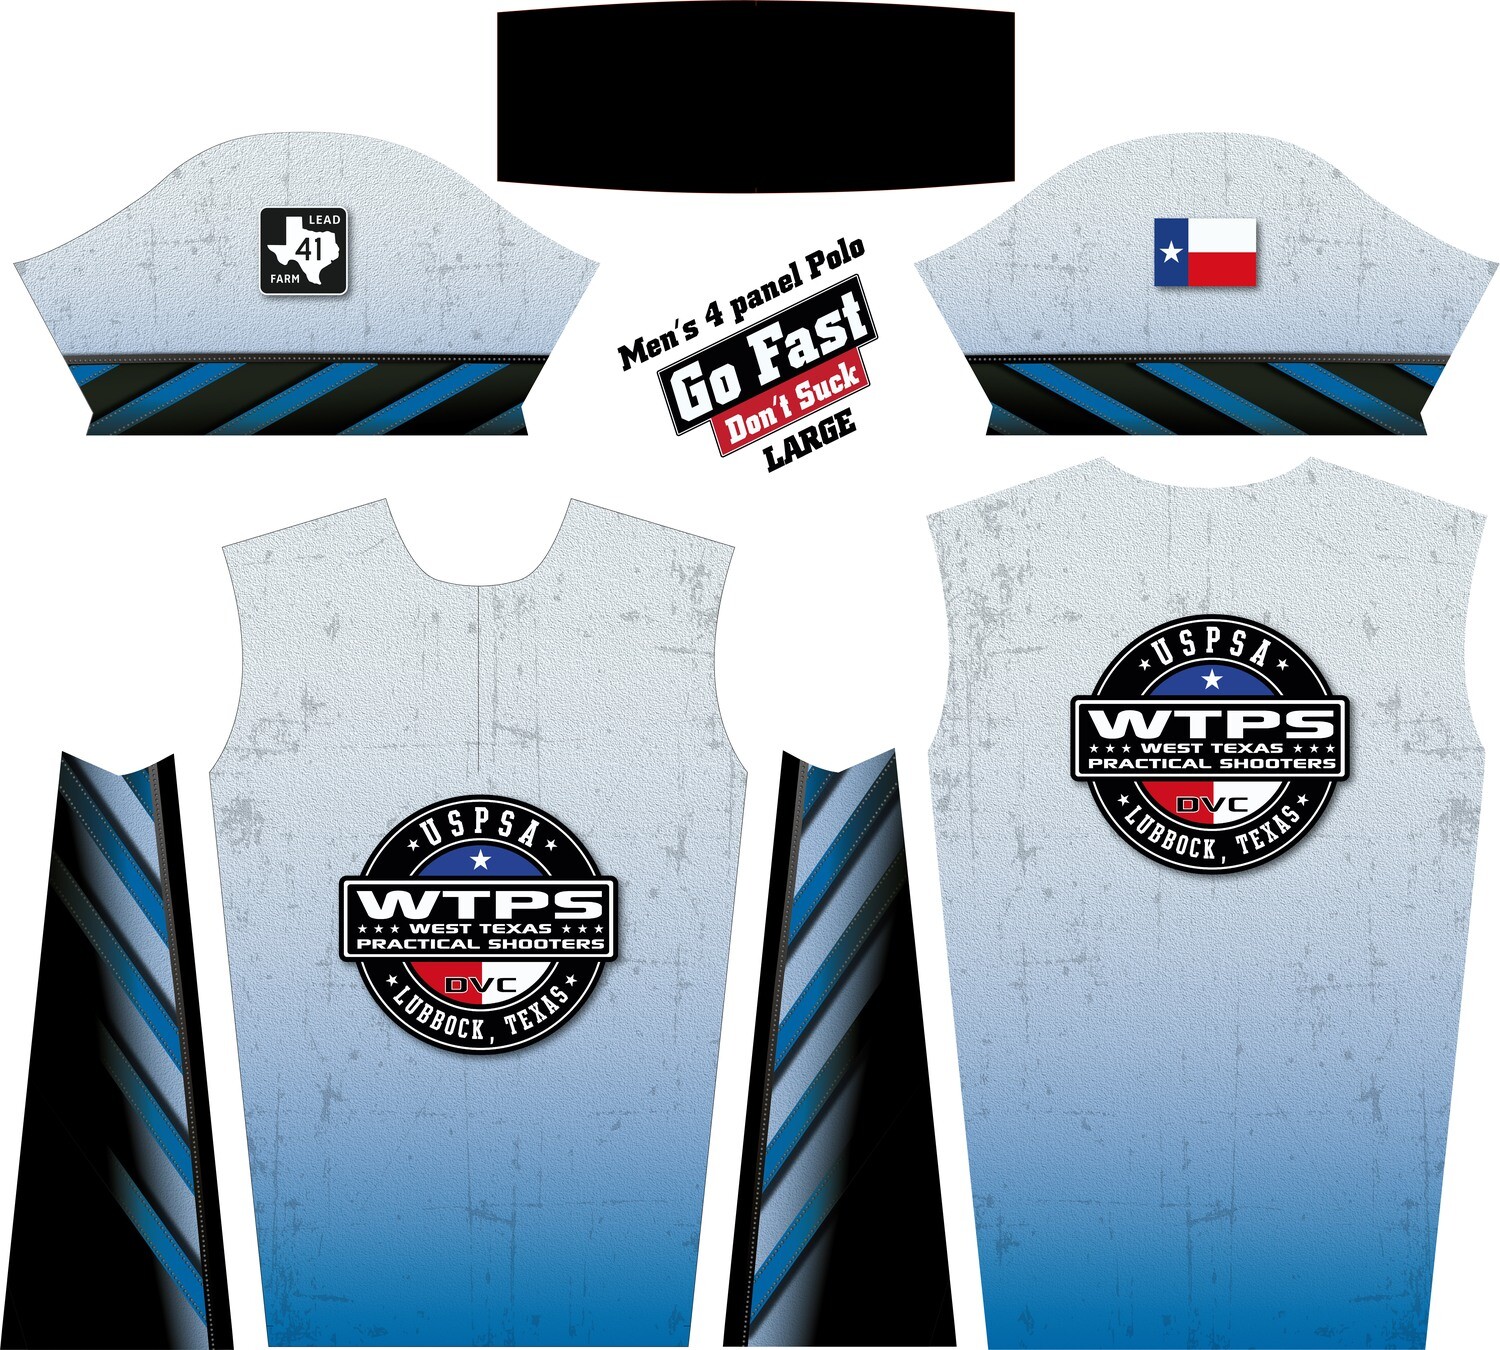 West Texas Practical Shooters jerseys